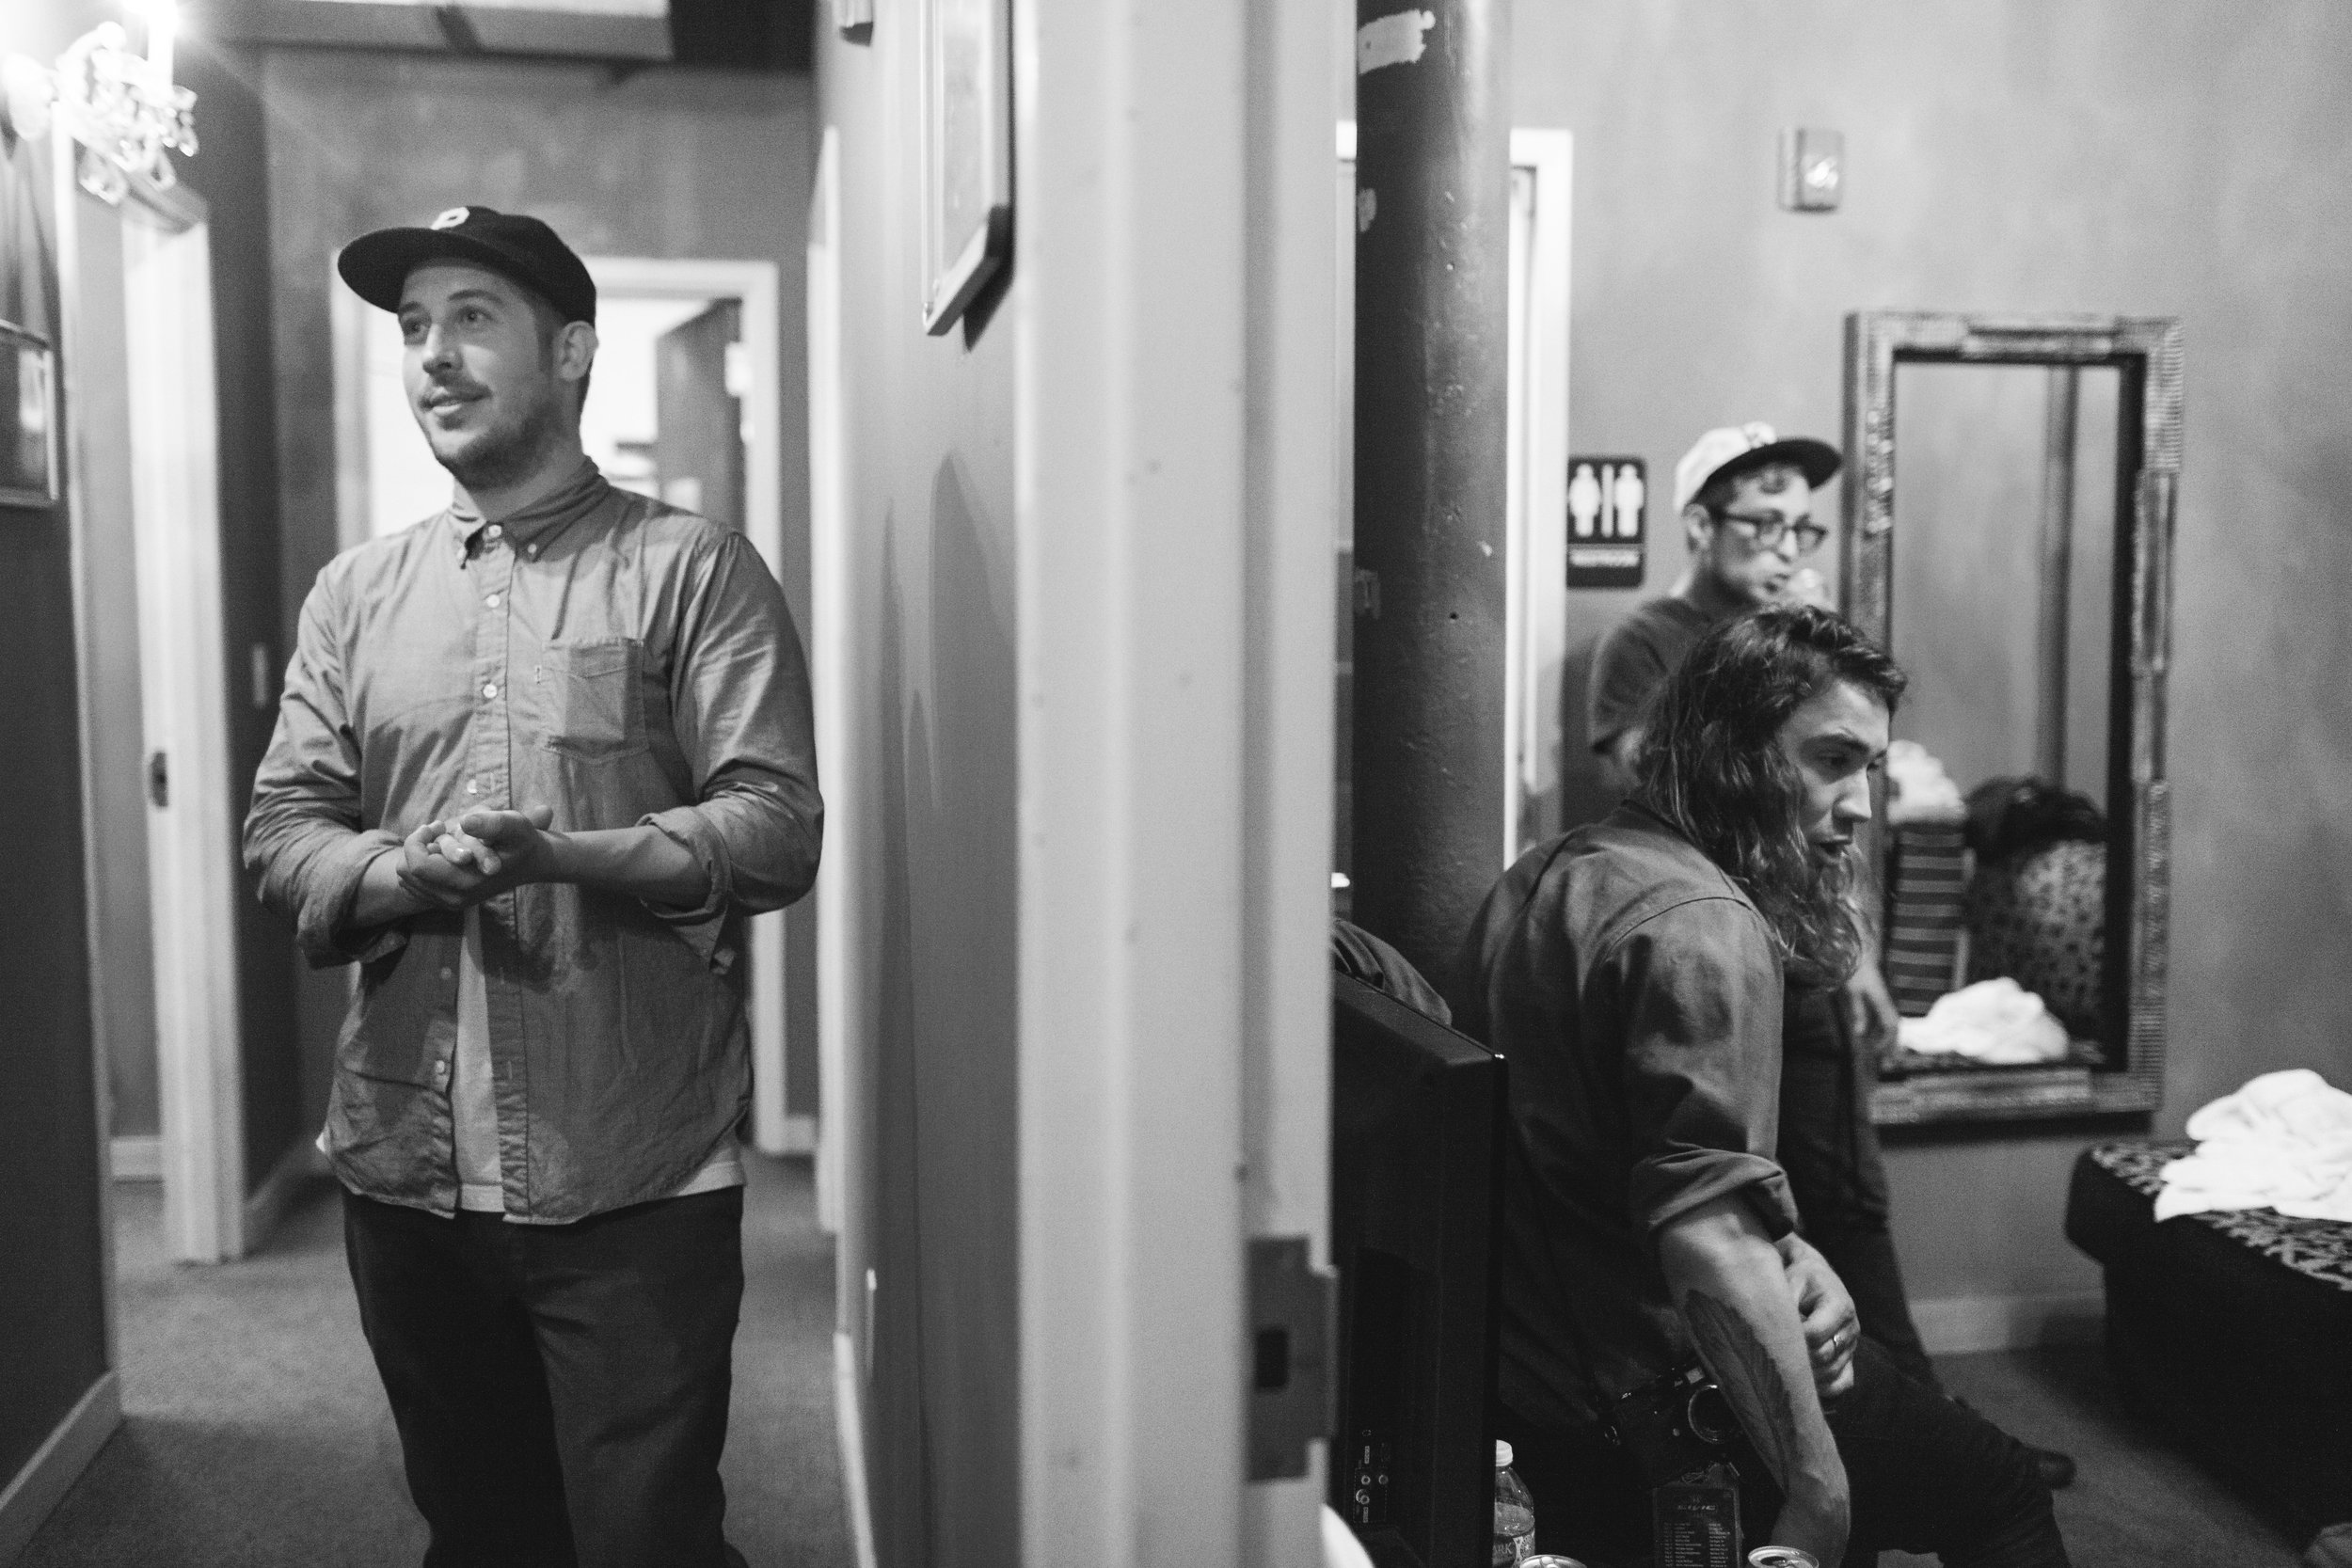 Portugal-The-Man-Behind-The-Scenes-Tour.jpg